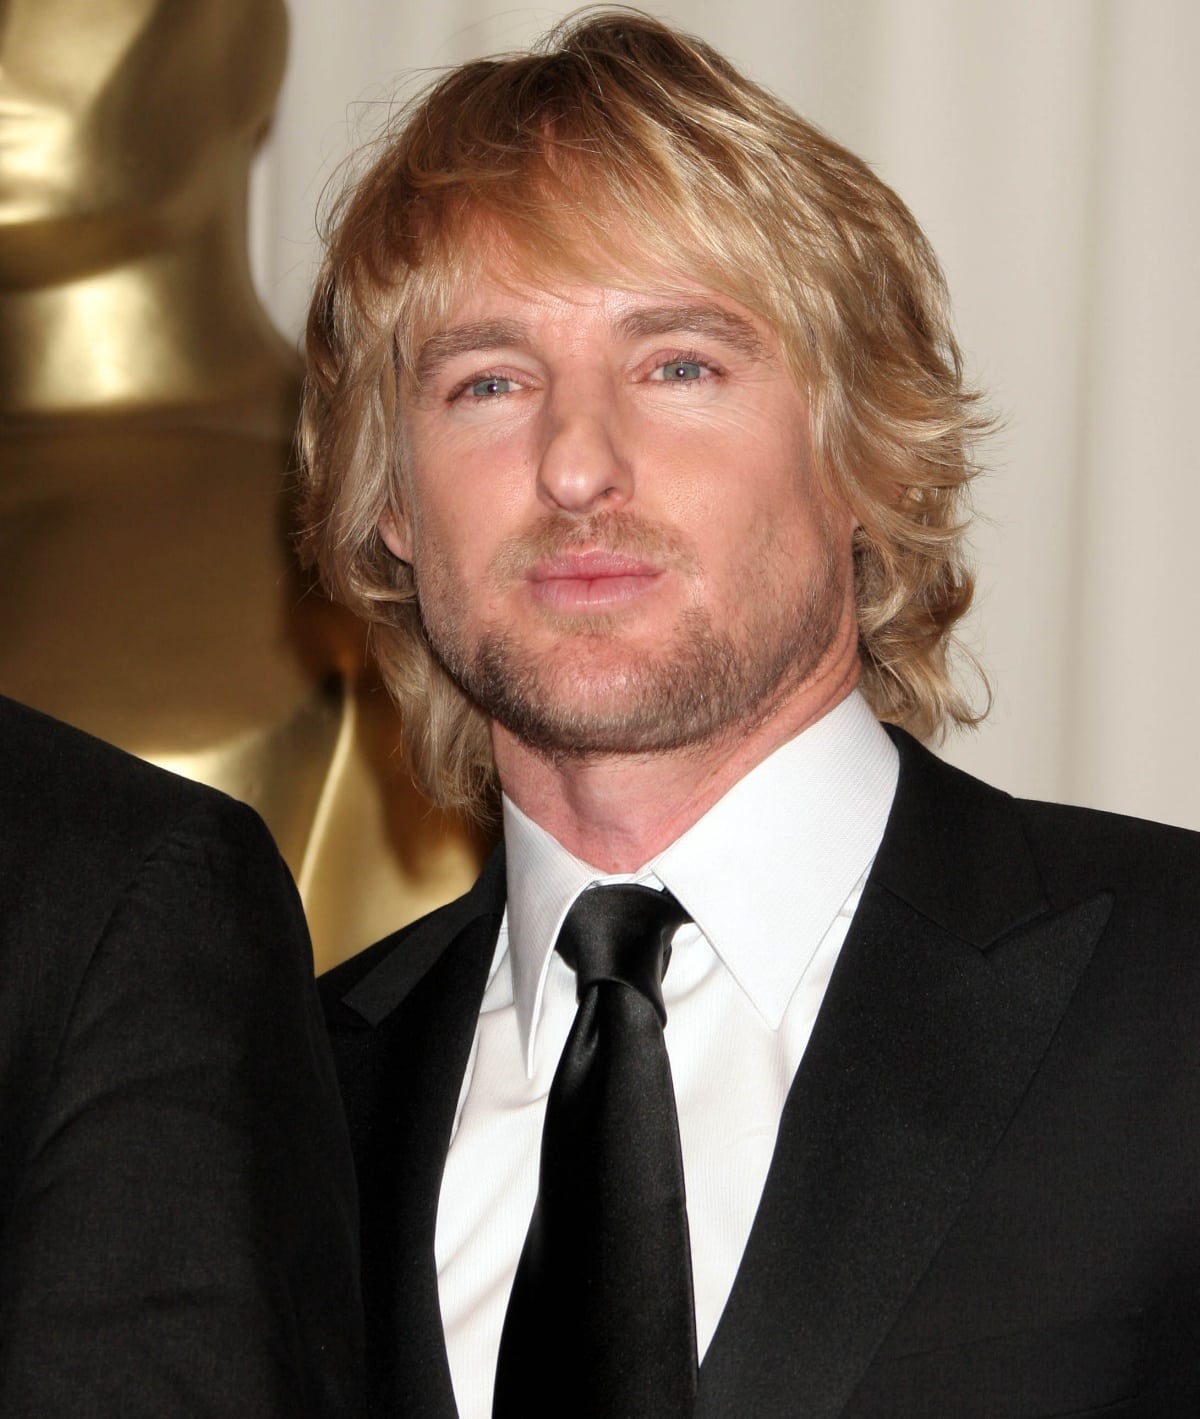 Owen Wilson in the press room during the 2006 Academy Awards